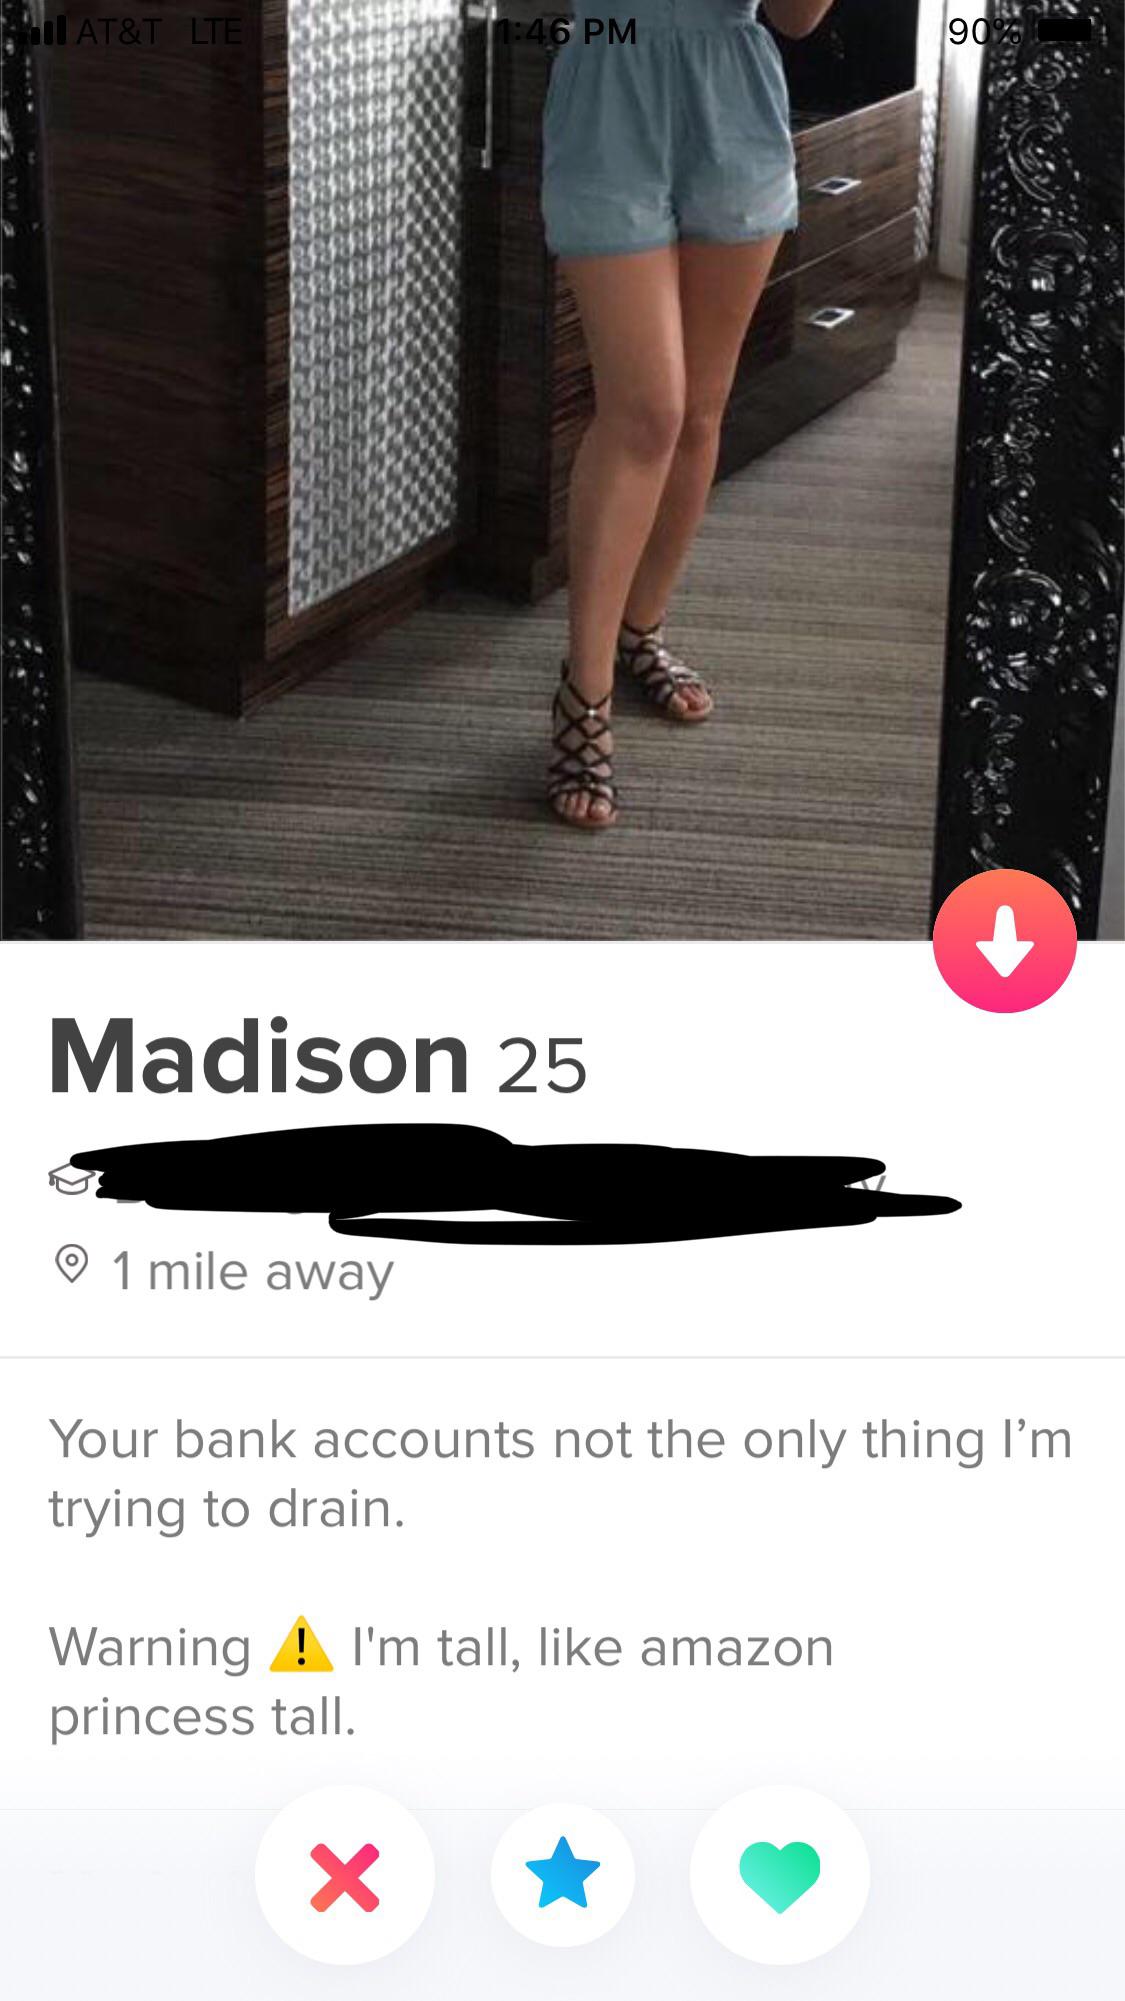 tinder - shoe - Ai At&T Lte Madison 25 0 1 mile away Your bank accounts not the only thing I'm trying to drain. Warning ! I'm tall, amazon princess tall. x